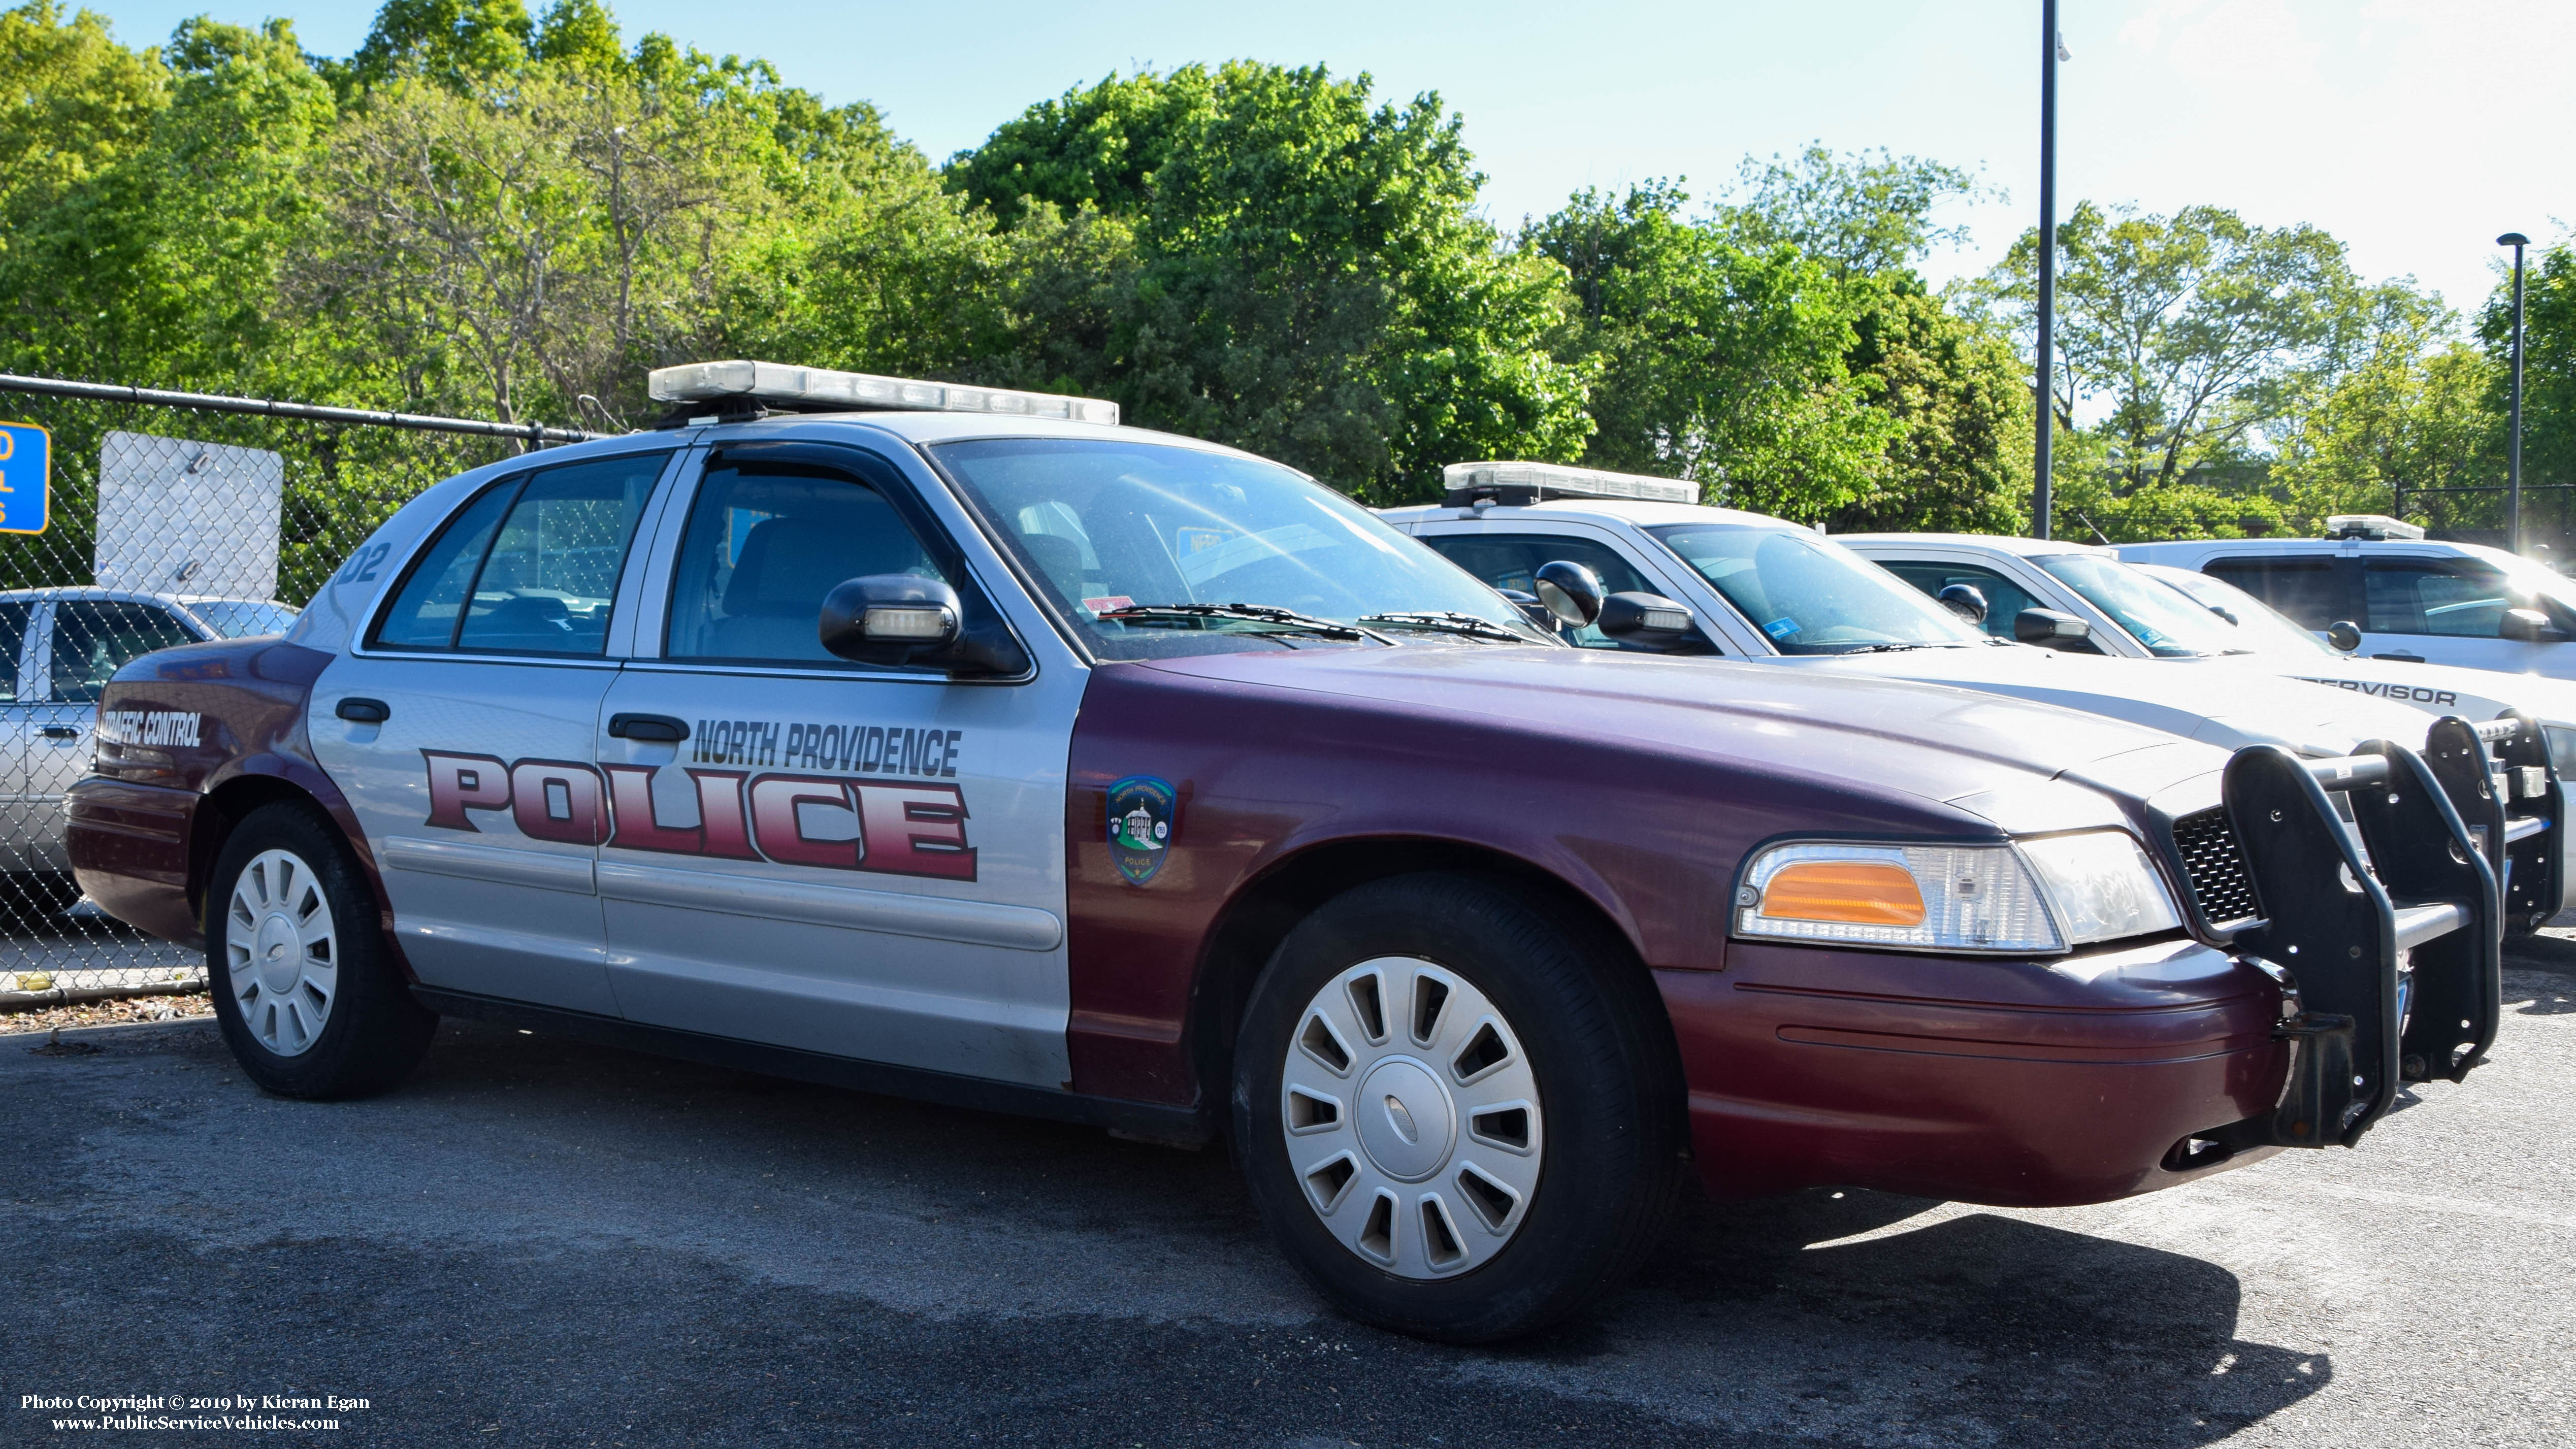 A photo  of North Providence Police
            Detail 2, a 2006-2008 Ford Crown Victoria Police Interceptor             taken by Kieran Egan